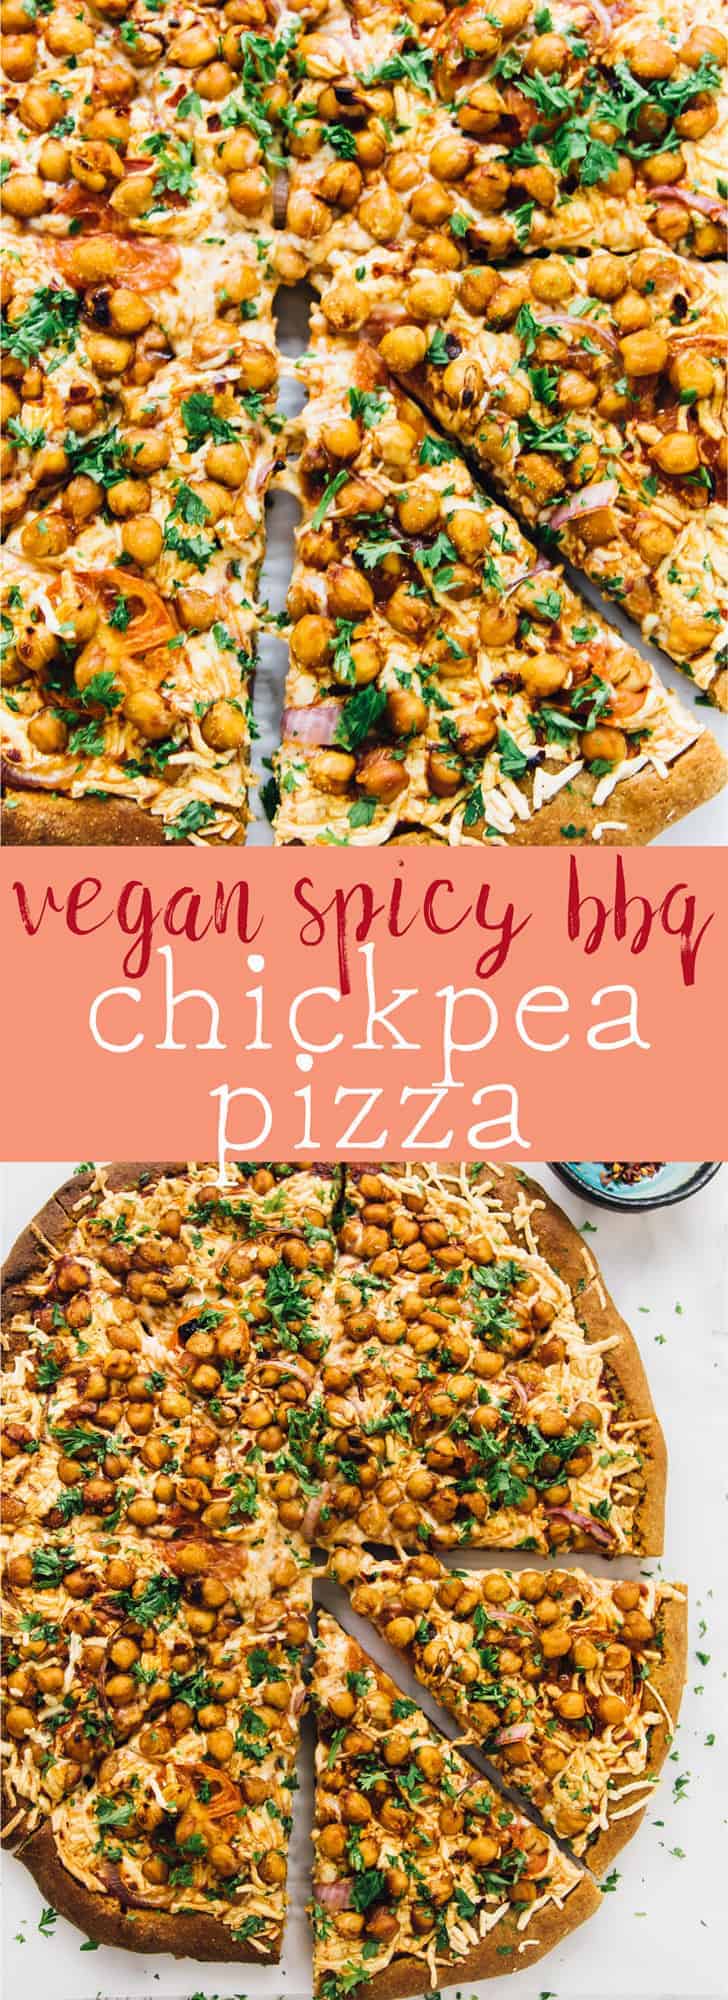 This Vegan Spicy BBQ Chickpea Pizza is a sweet and spicy pizza hit! It's so easy you can make it on a weeknight while adding extra protein to your meal! via https://jessicainthekitchen.com 